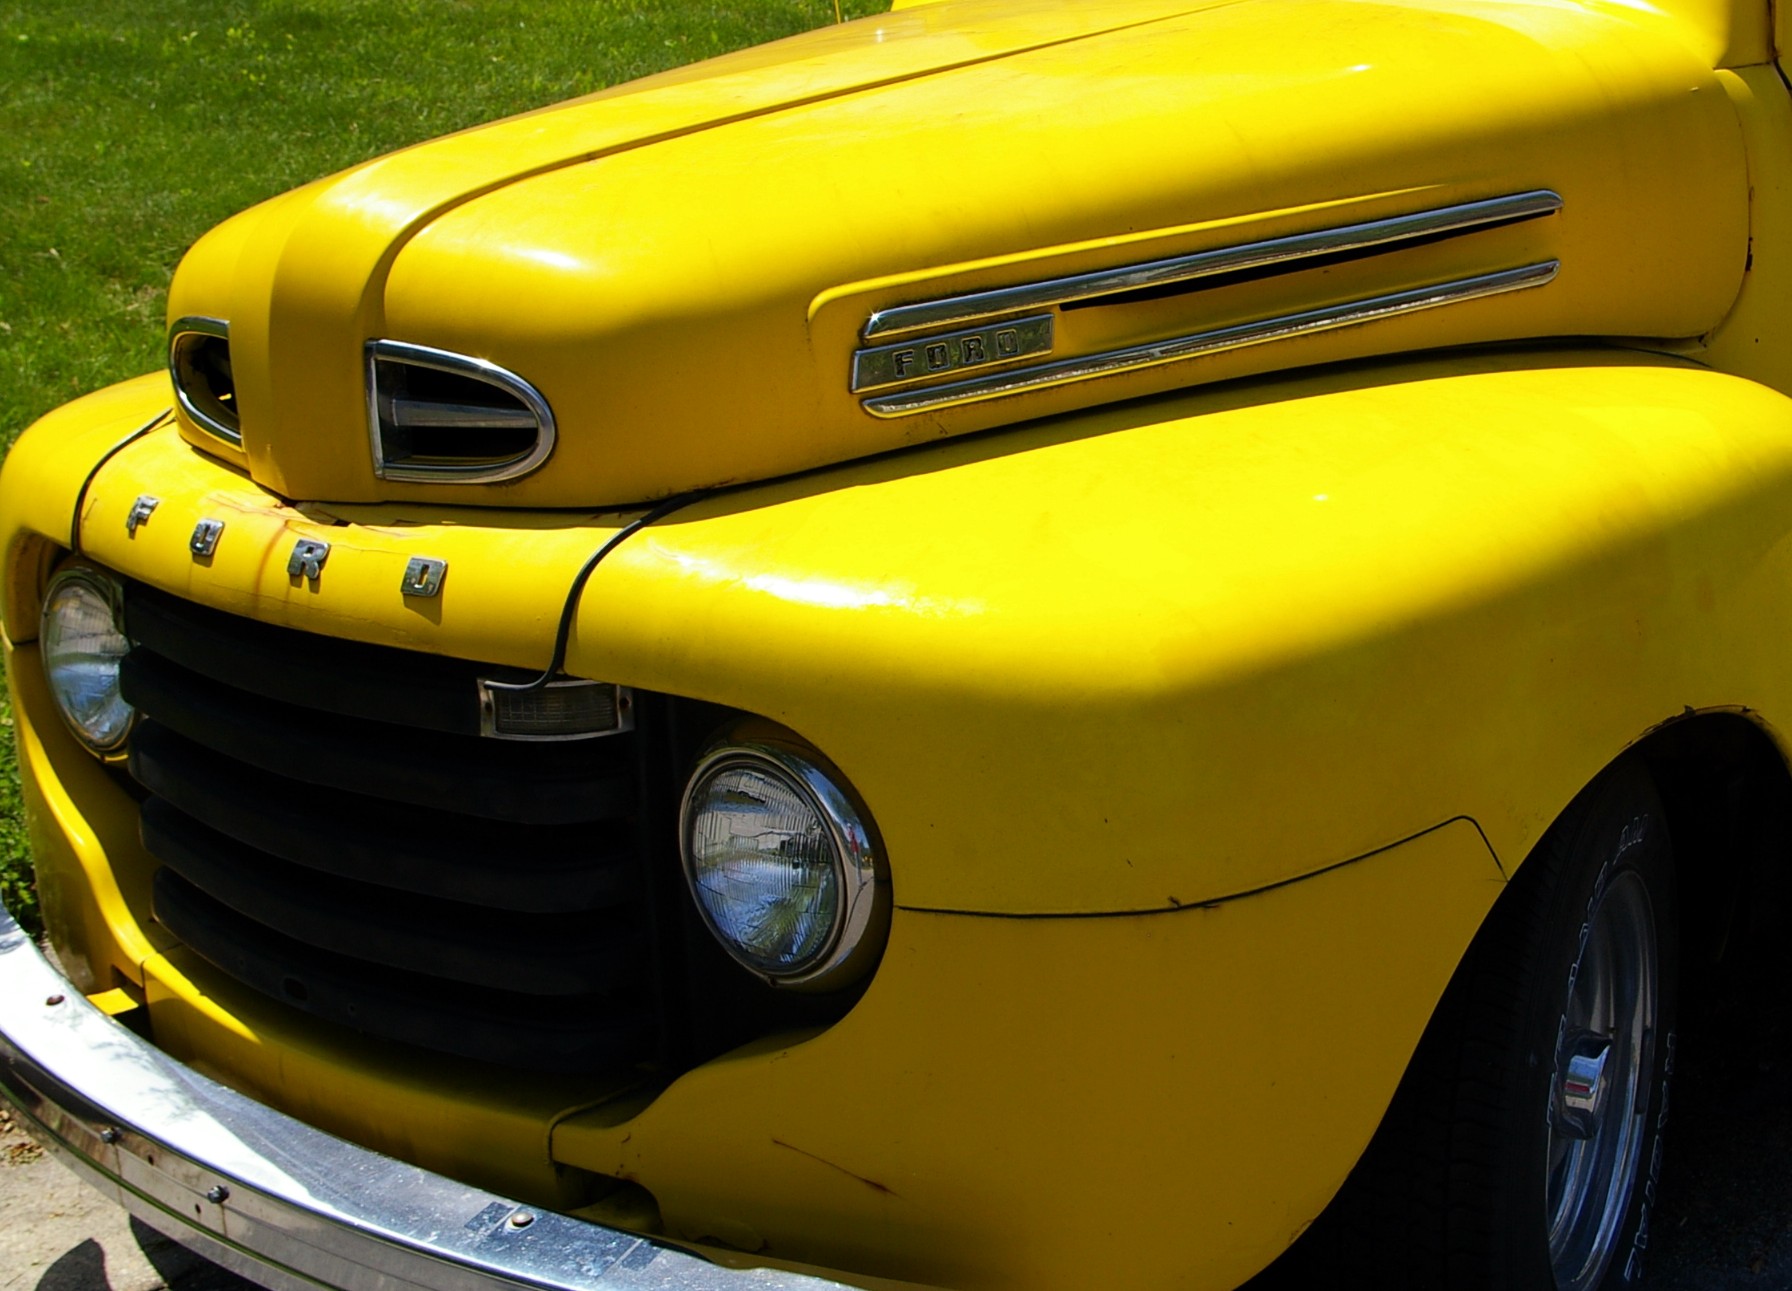 an old yellow truck with shiny chrome lettering